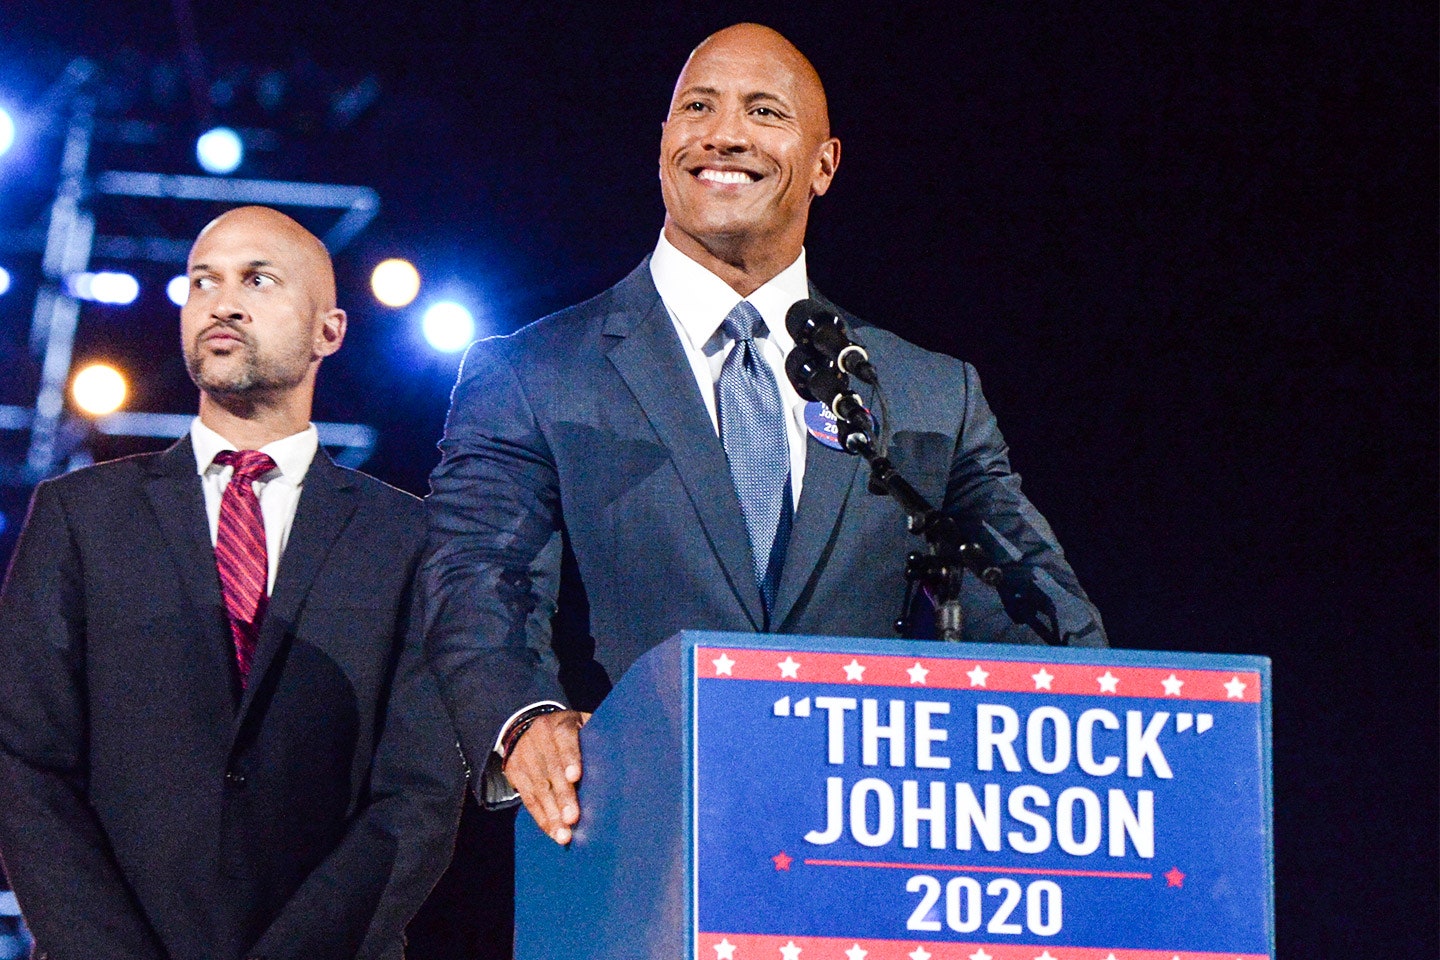 The Rock for President in 2020? “I Wouldn't Rule It Out” | Vanity Fair